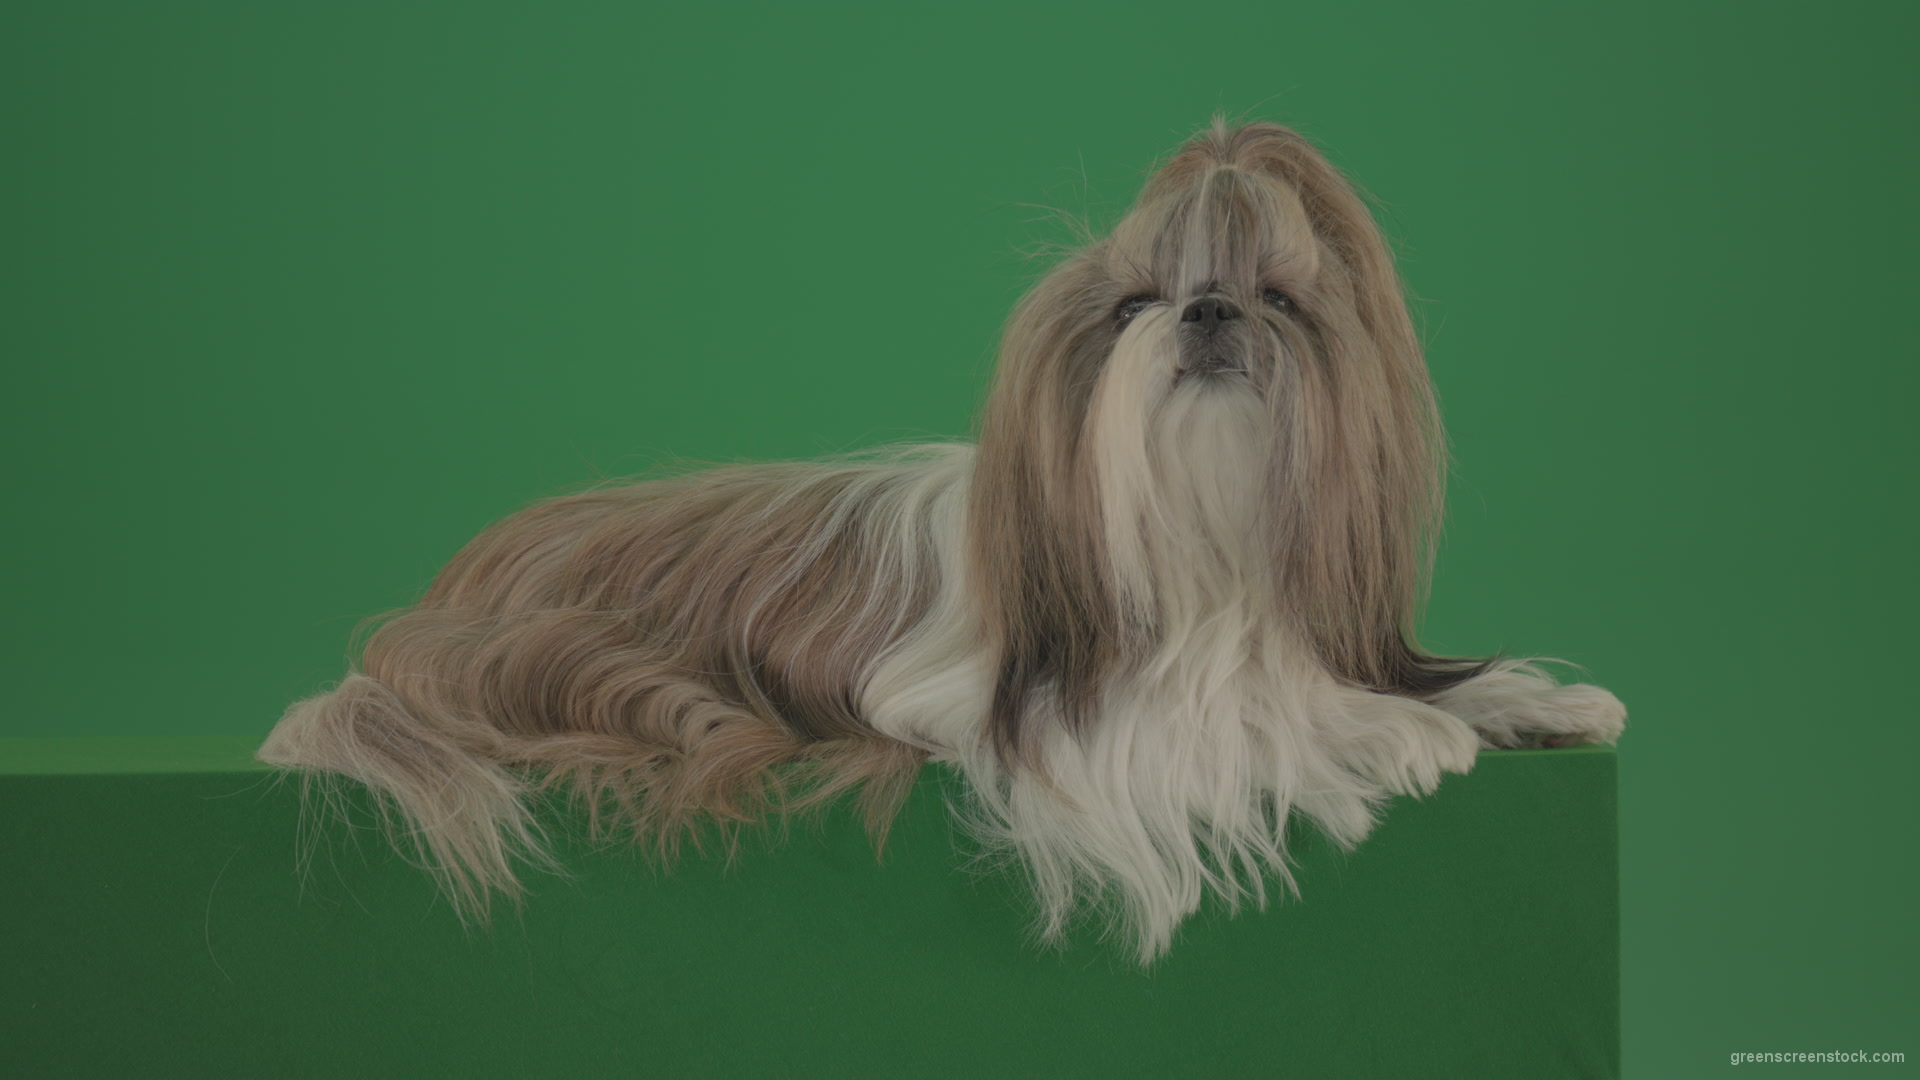 Fashion-luxury-toy-dog-Shihtzu-chilling-on-green-screen-isolated-background-4K_006 Green Screen Stock